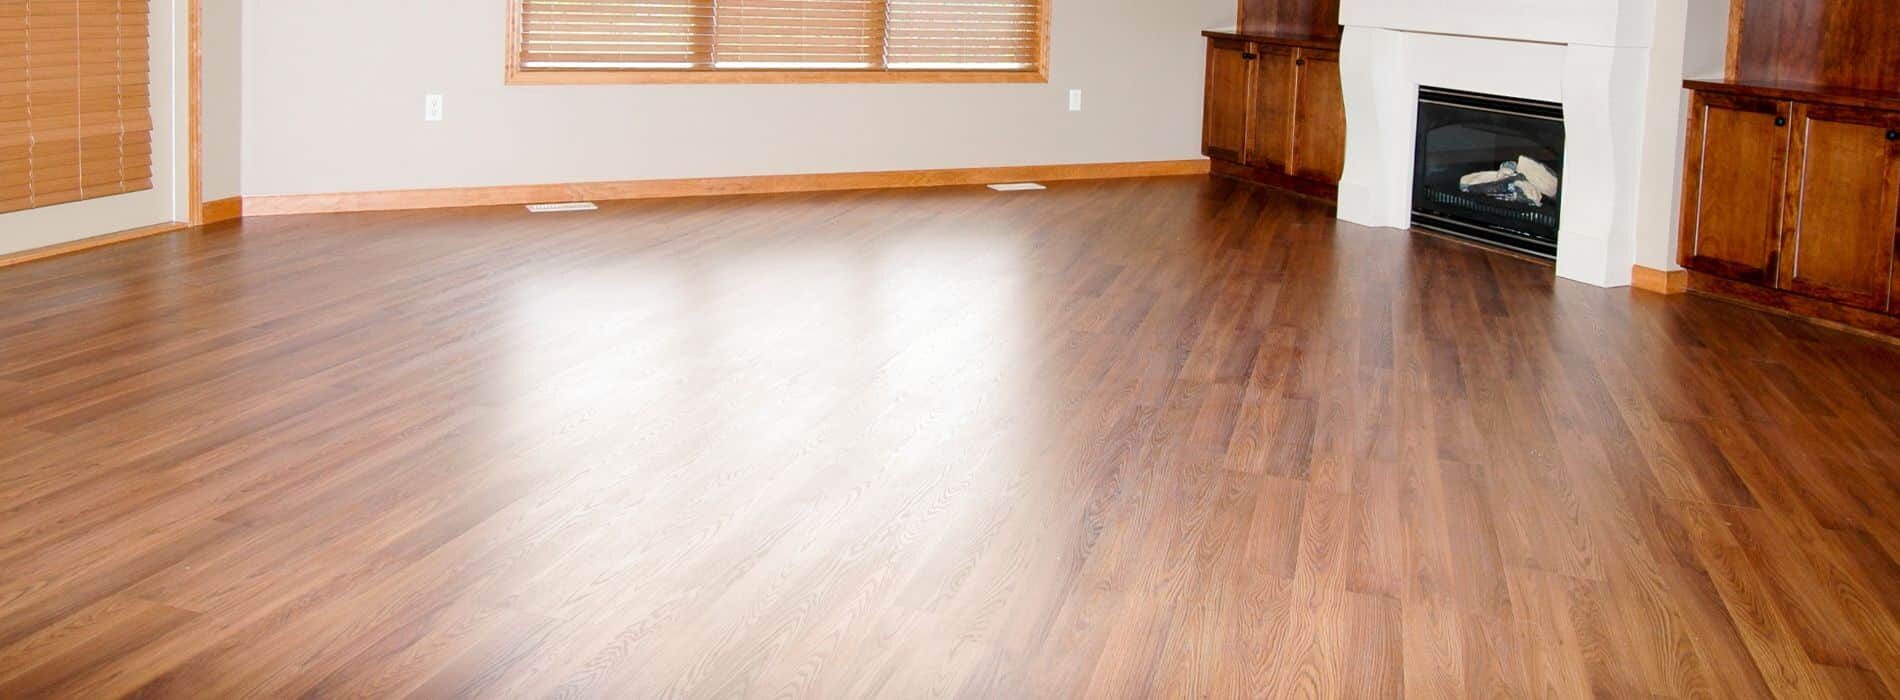 Professionally renewed 7-year-old hardwood floor in Chislehurst, BR7. Mr Sander® utilized Bona 2.2K Frost whitewashing and Traffic HD 16% sheen matte lacquer, ensuring both endurance and exquisite aesthetics. Enjoy timeless elegance with this resilient, visually captivating finish.